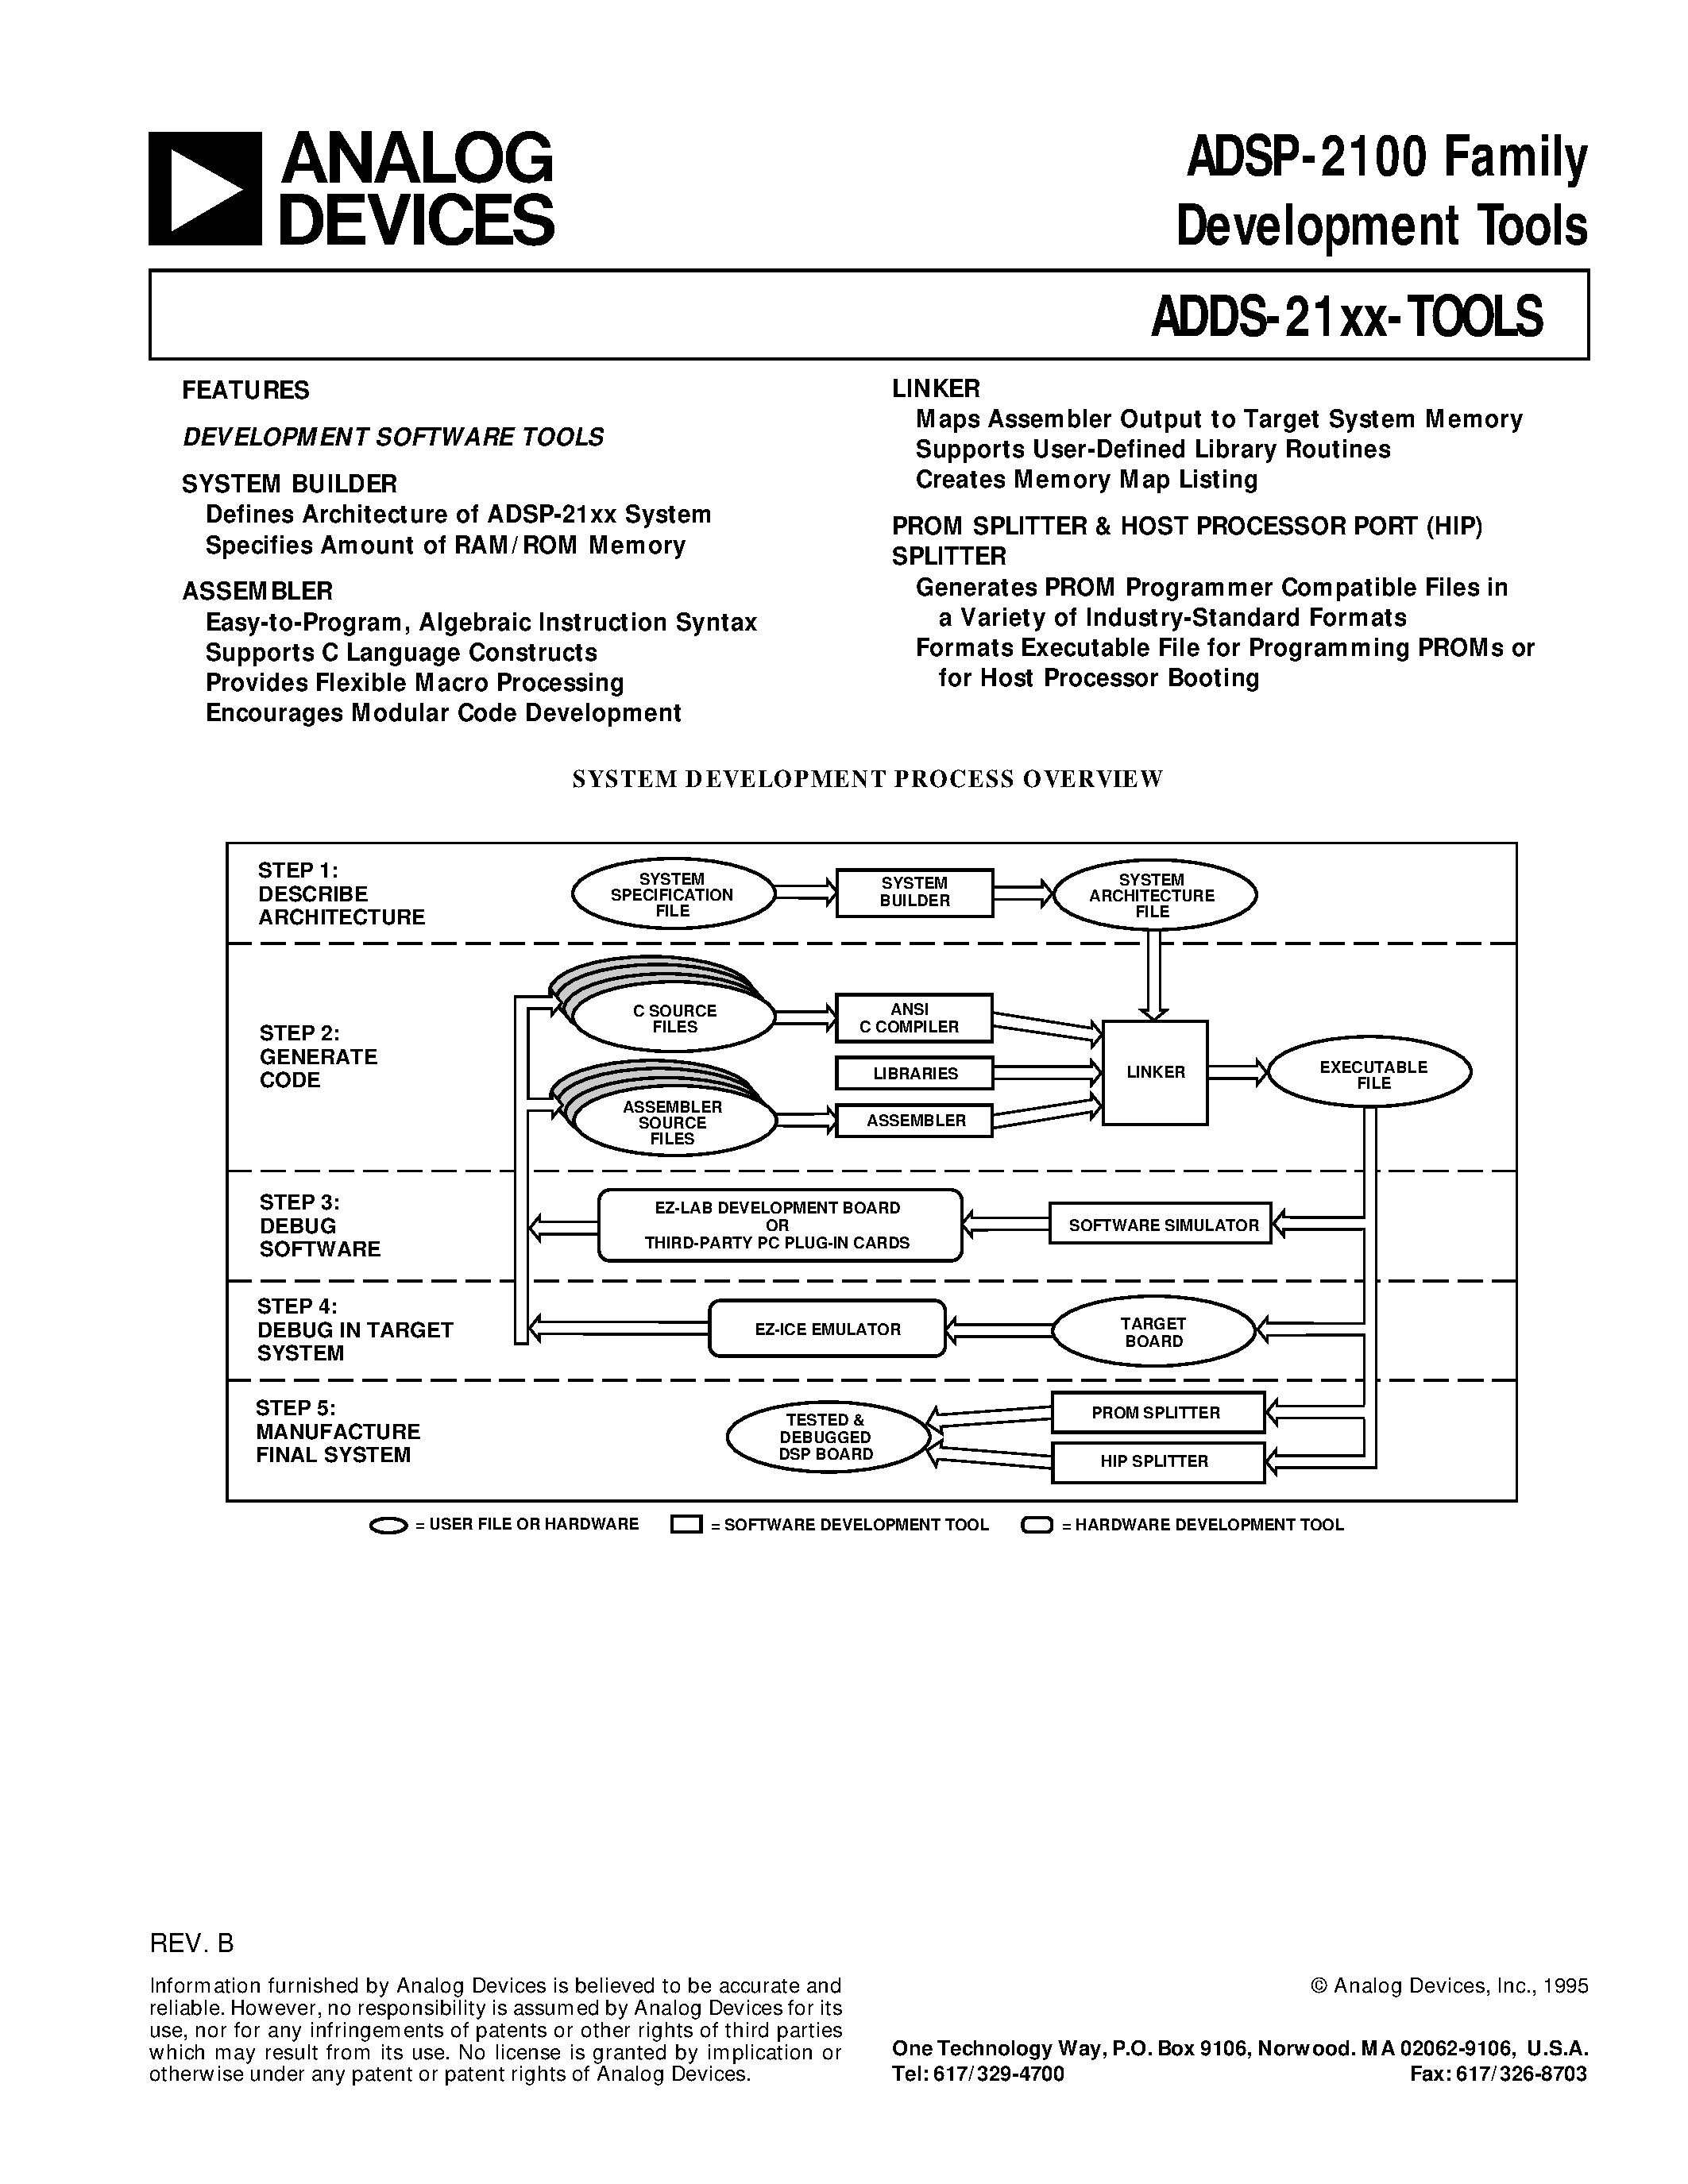 Datasheet ADDS-2111-EZ-LAB - ADSP-2100 Family Development Tools page 1